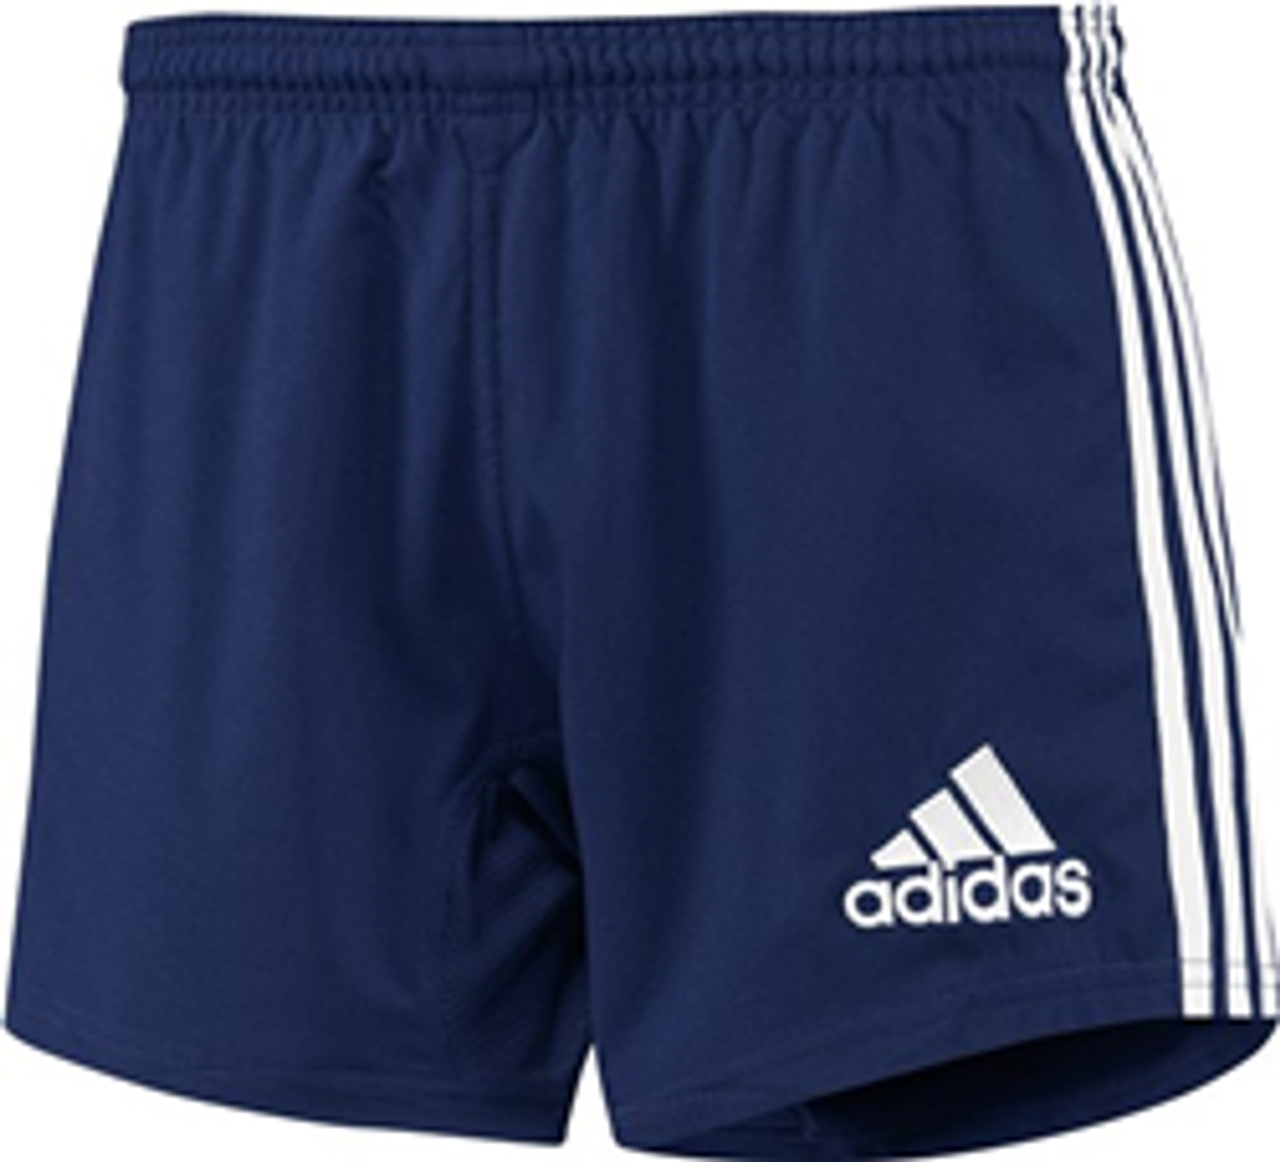 Adidas 3-Stripes Performance Rugby 